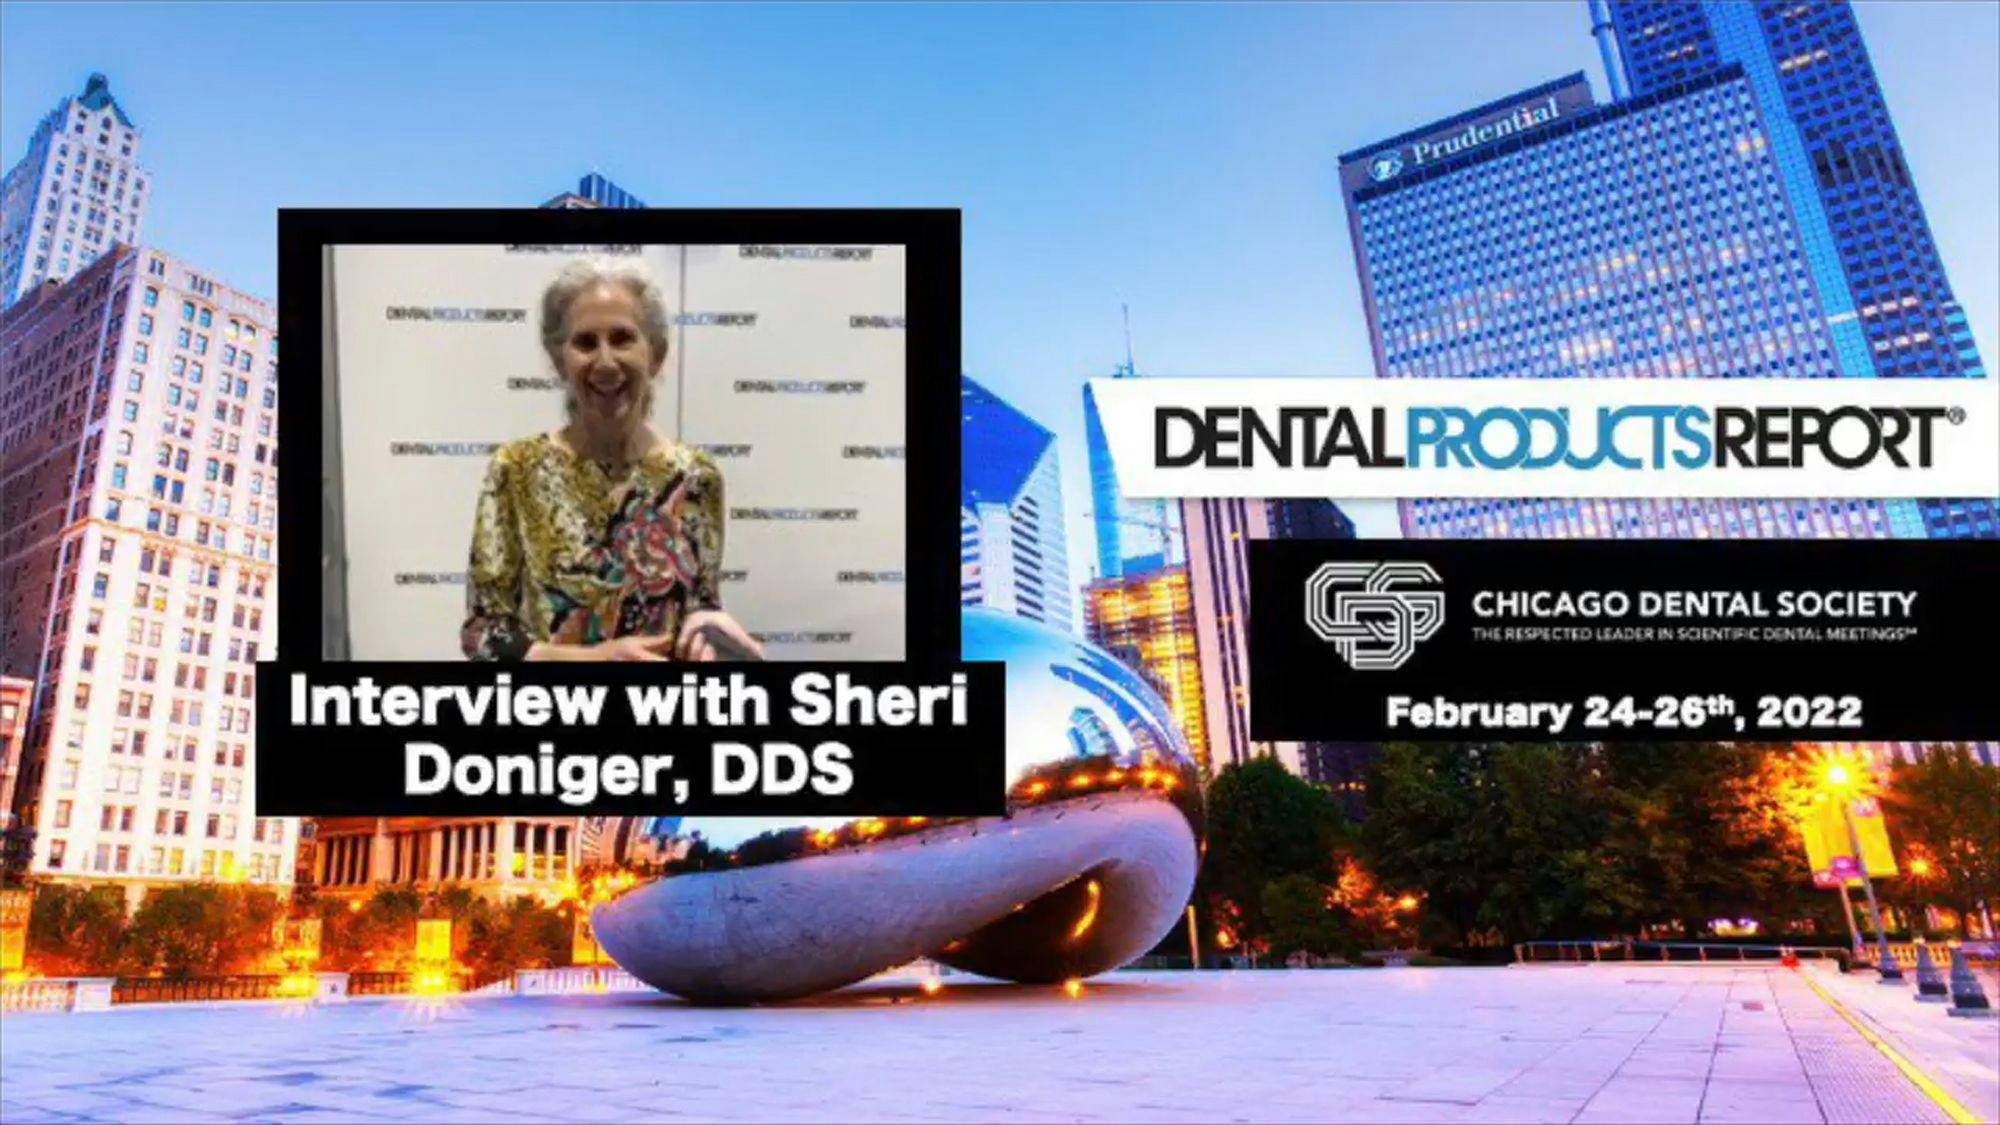 2022 Chicago Dental Society Midwinter Meeting, Interview with Sheri Doniger, DDS